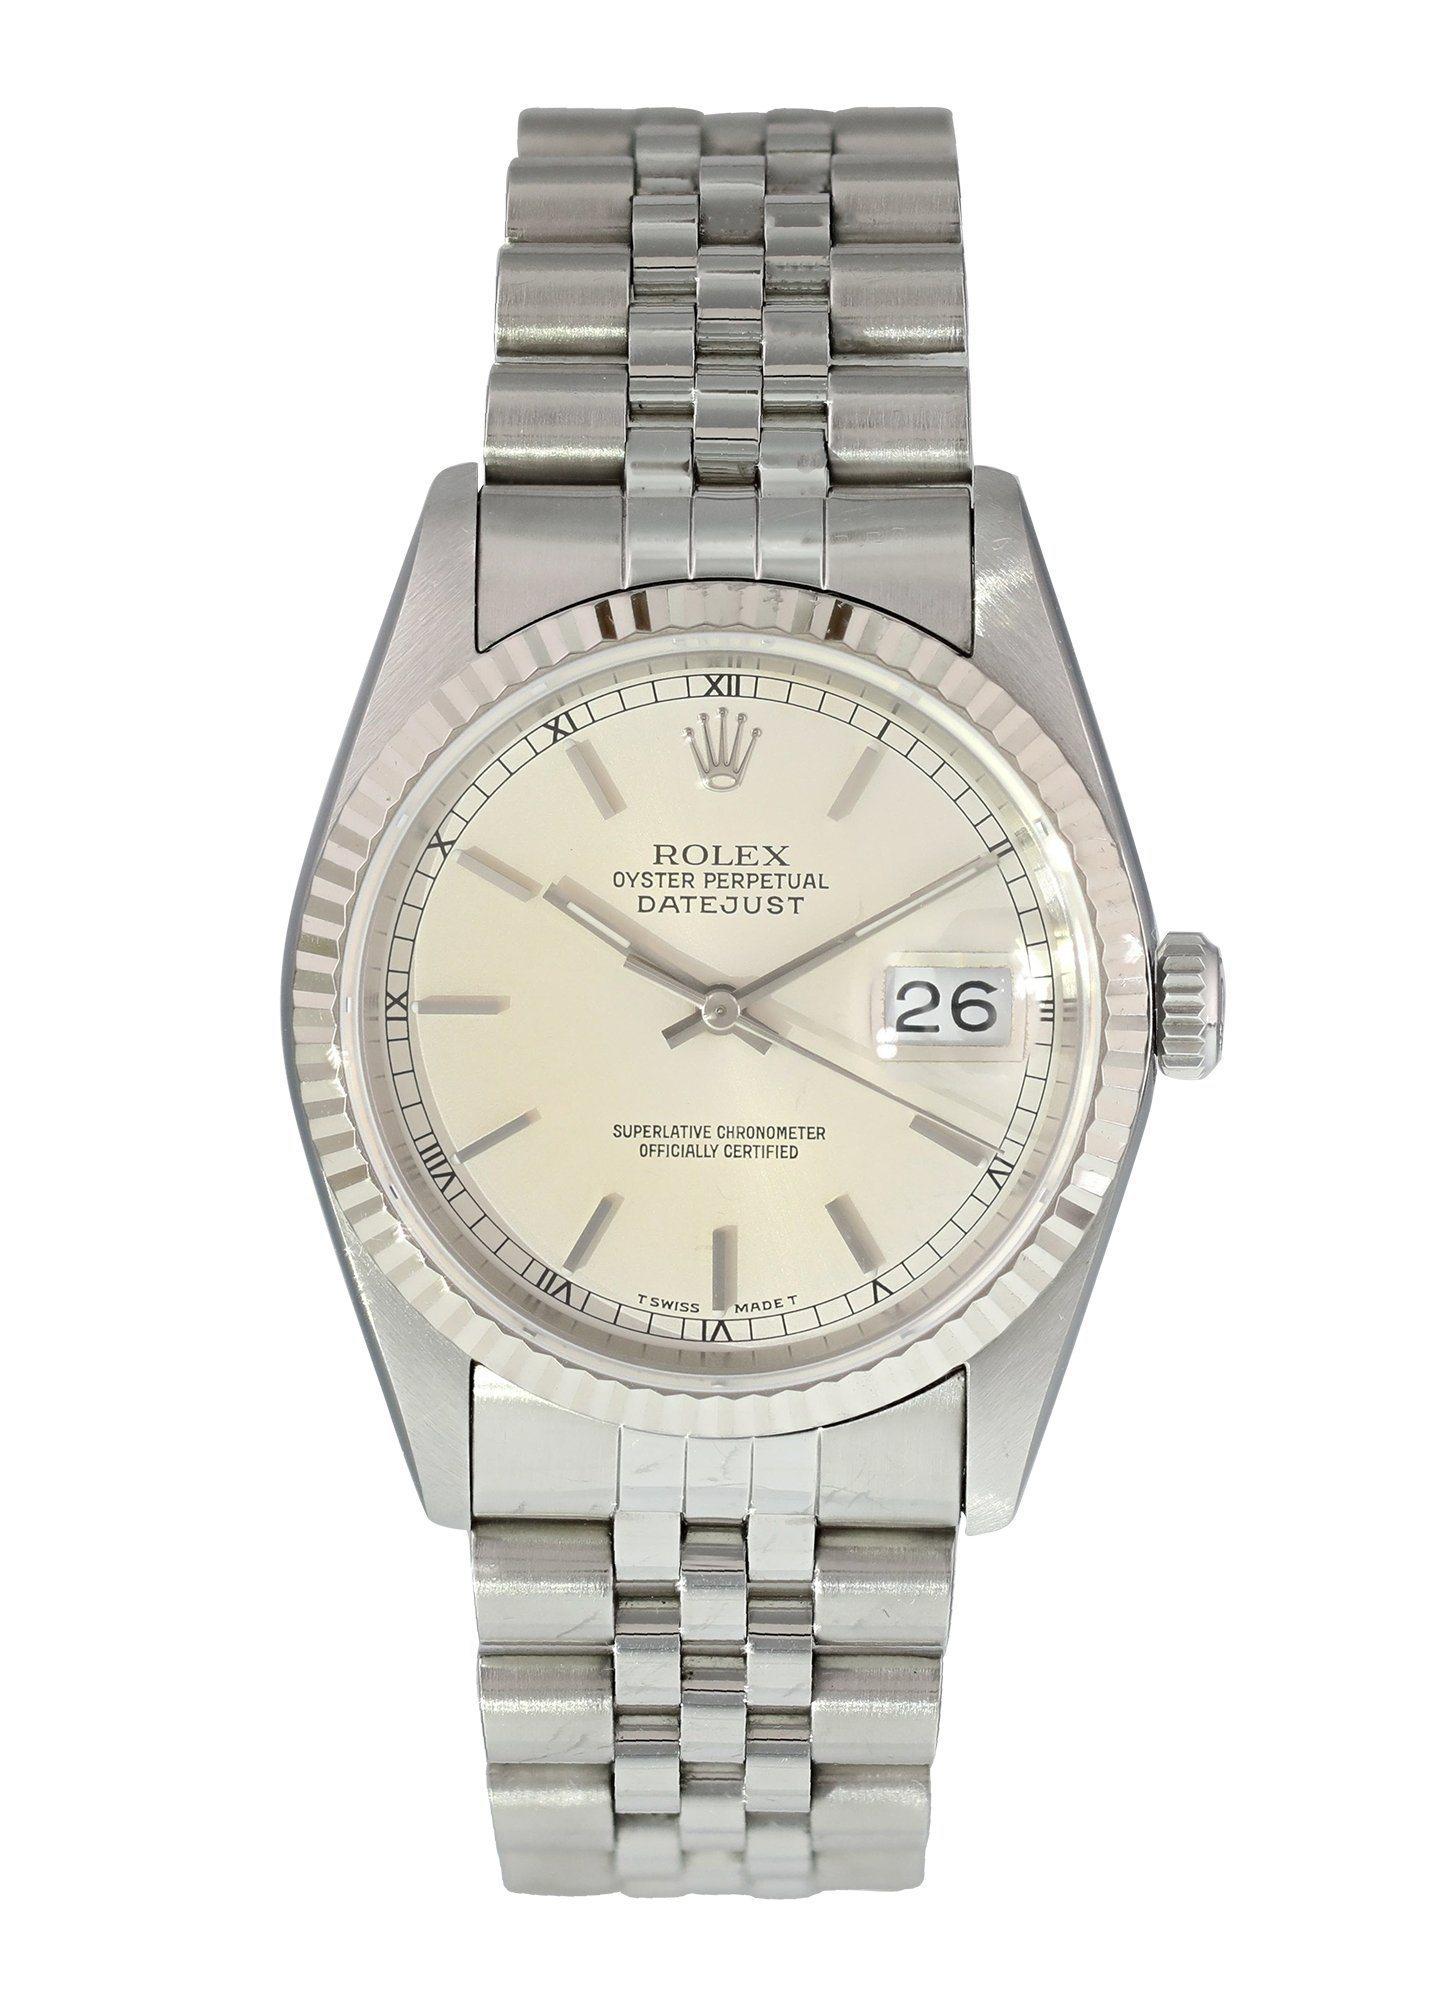 Rolex Oyster Perpetual Datejust 16014 Men's Watch
36mm Stainless Steel case. 
White Gold Stationary bezel. 
Silver dial with Luminous Steel hands and index hour markers. 
Minute markers on the outer dial. 
Date display at the 3 o'clock position.